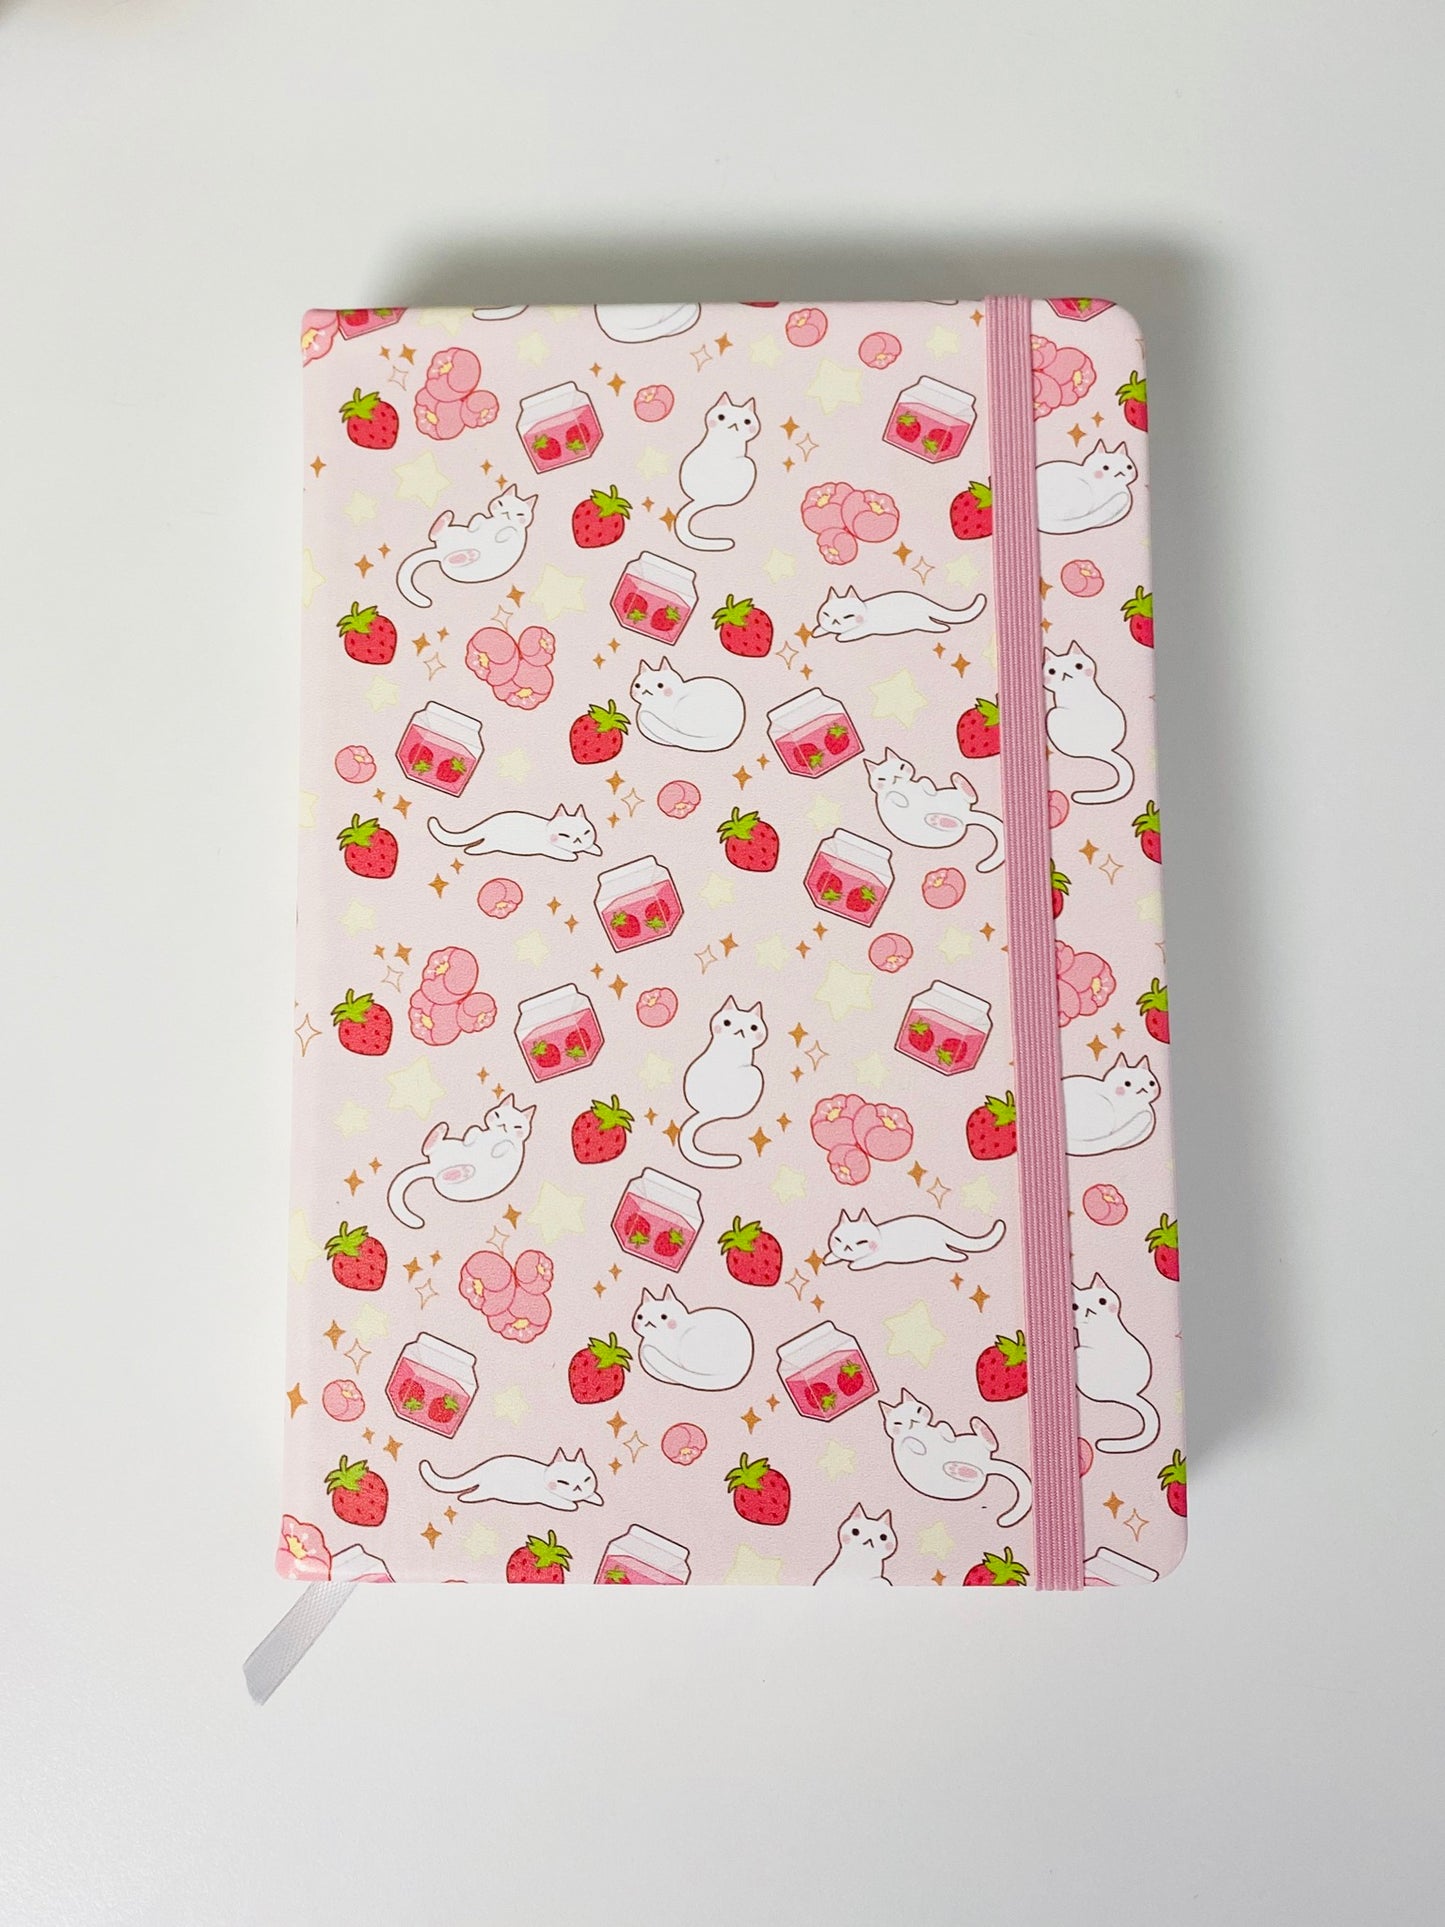 Strawberry Milk and Kitties PU Faux leather Watercolor Sketchbook Blank 300gsm 40sheets/80pages Hard Cover